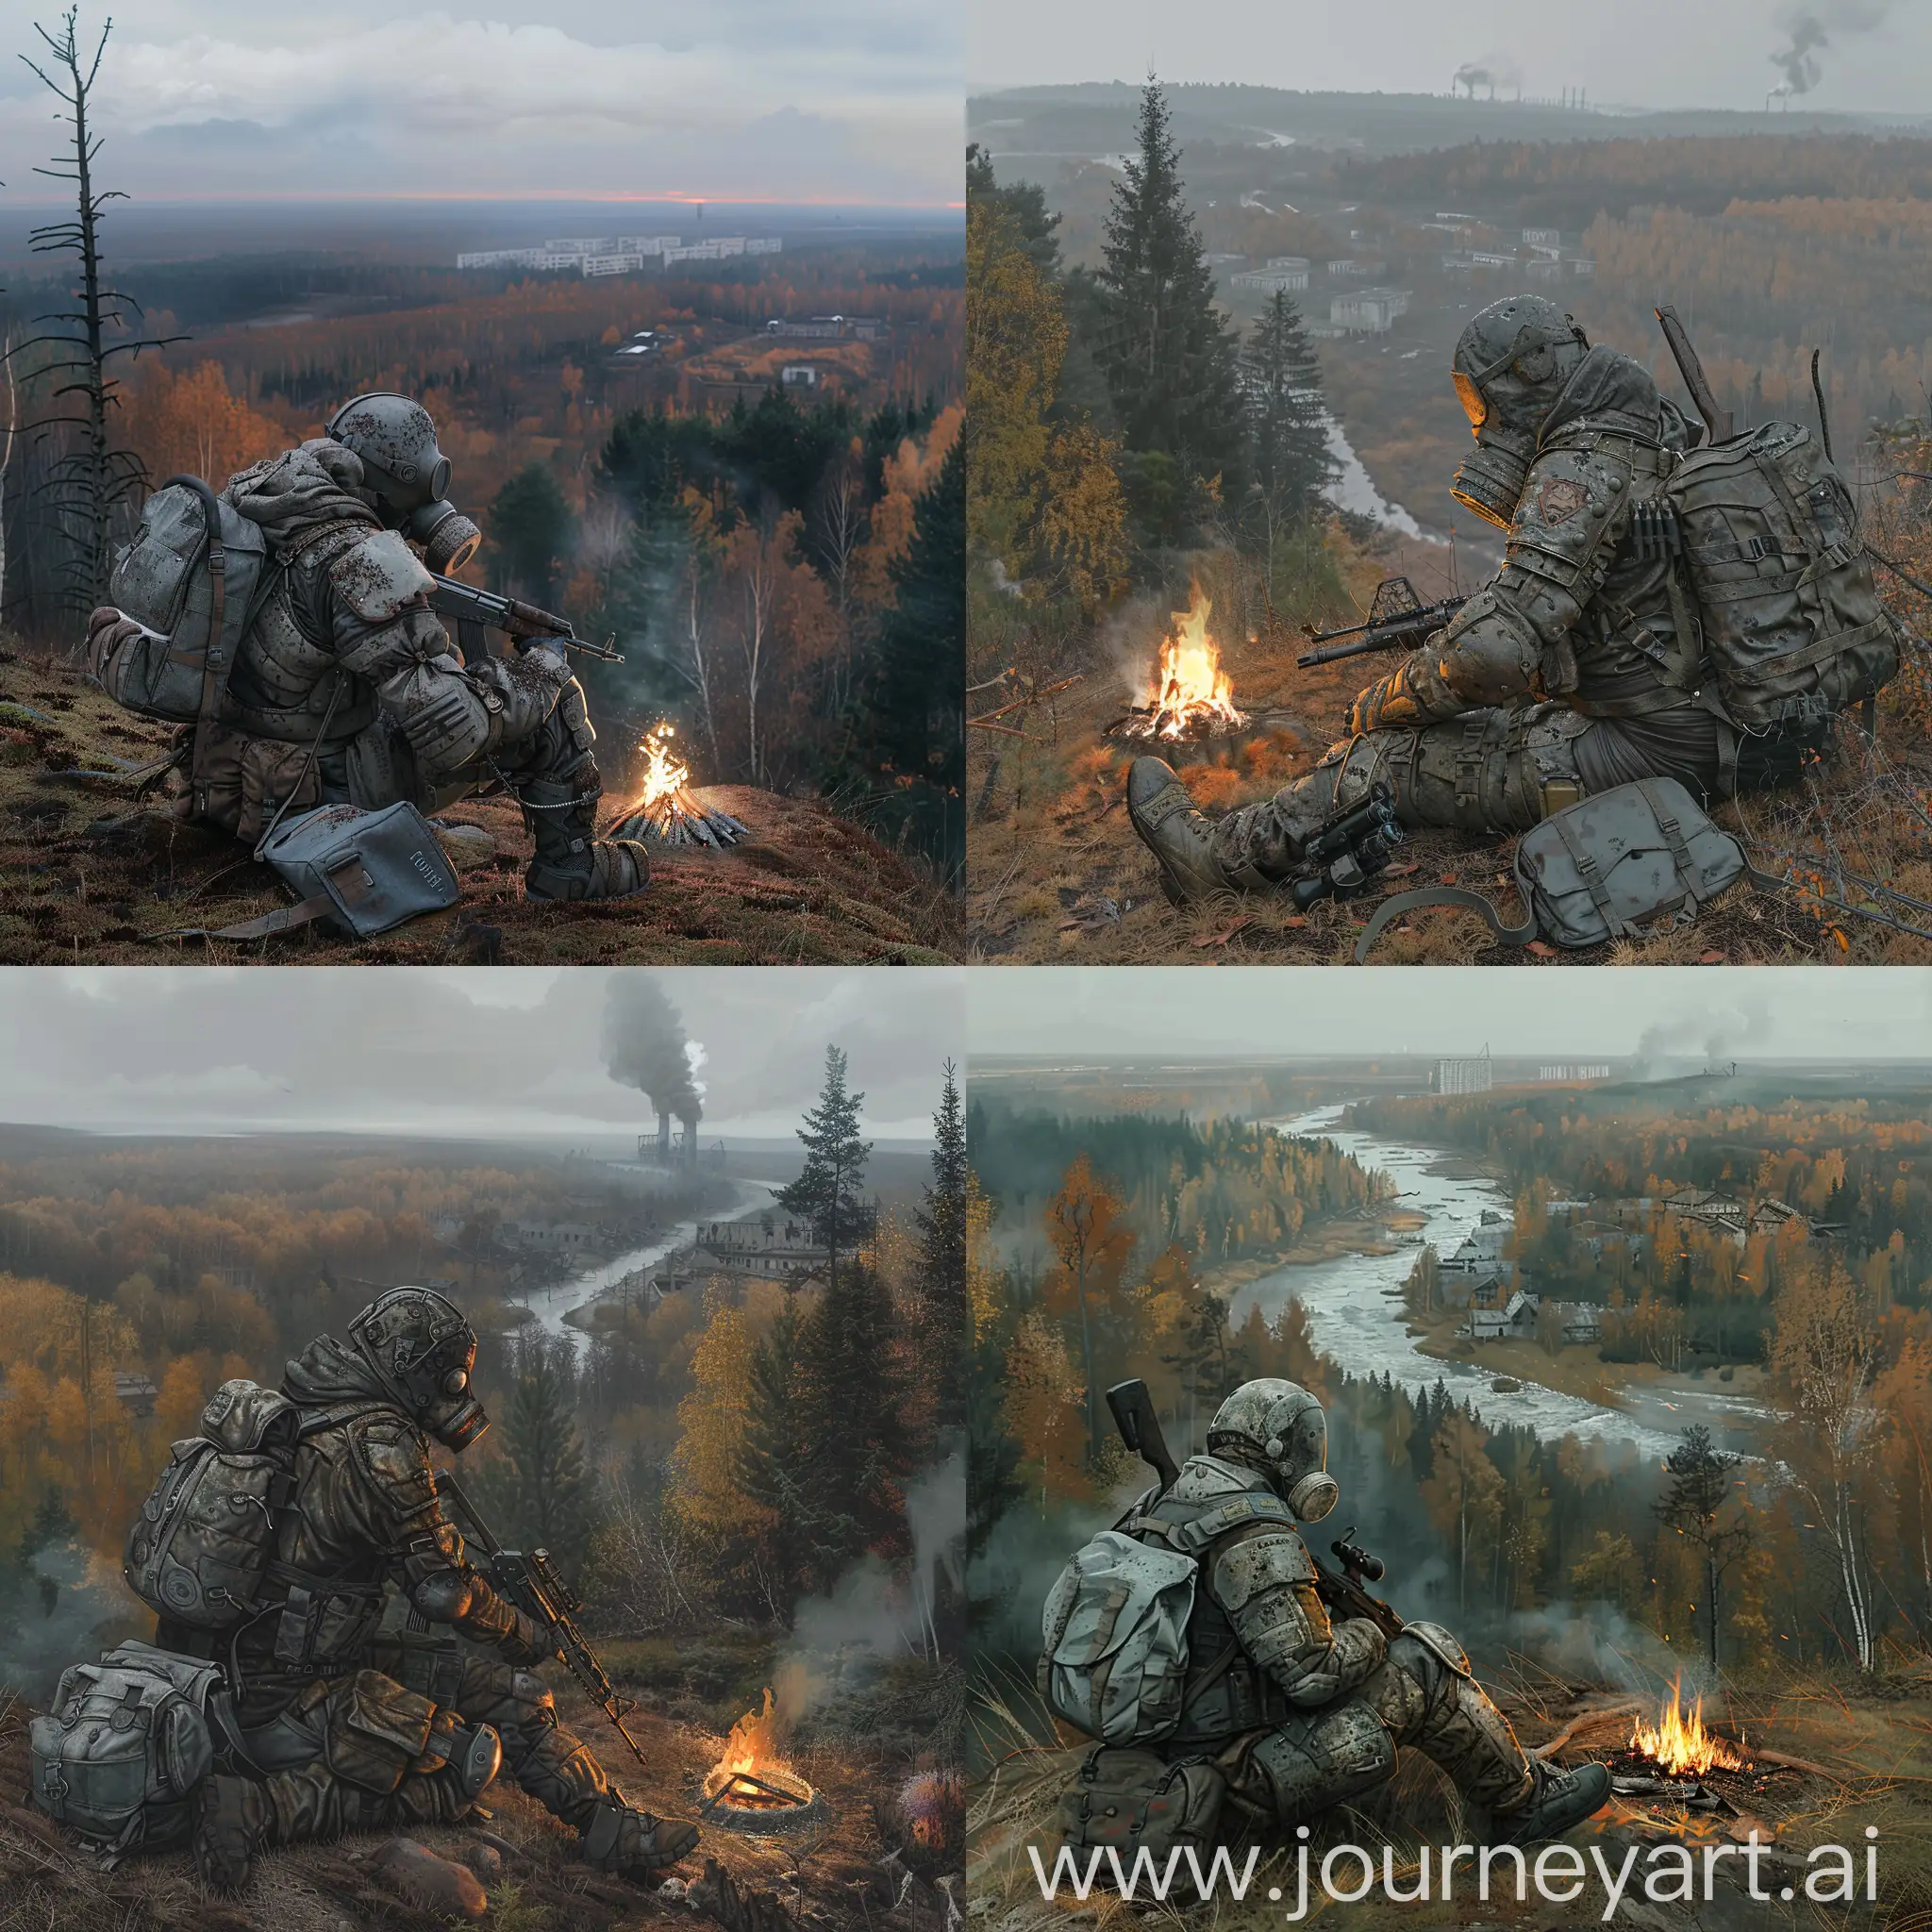 Stalker-with-Rifle-by-Campfire-Overlooking-Abandoned-Soviet-Village